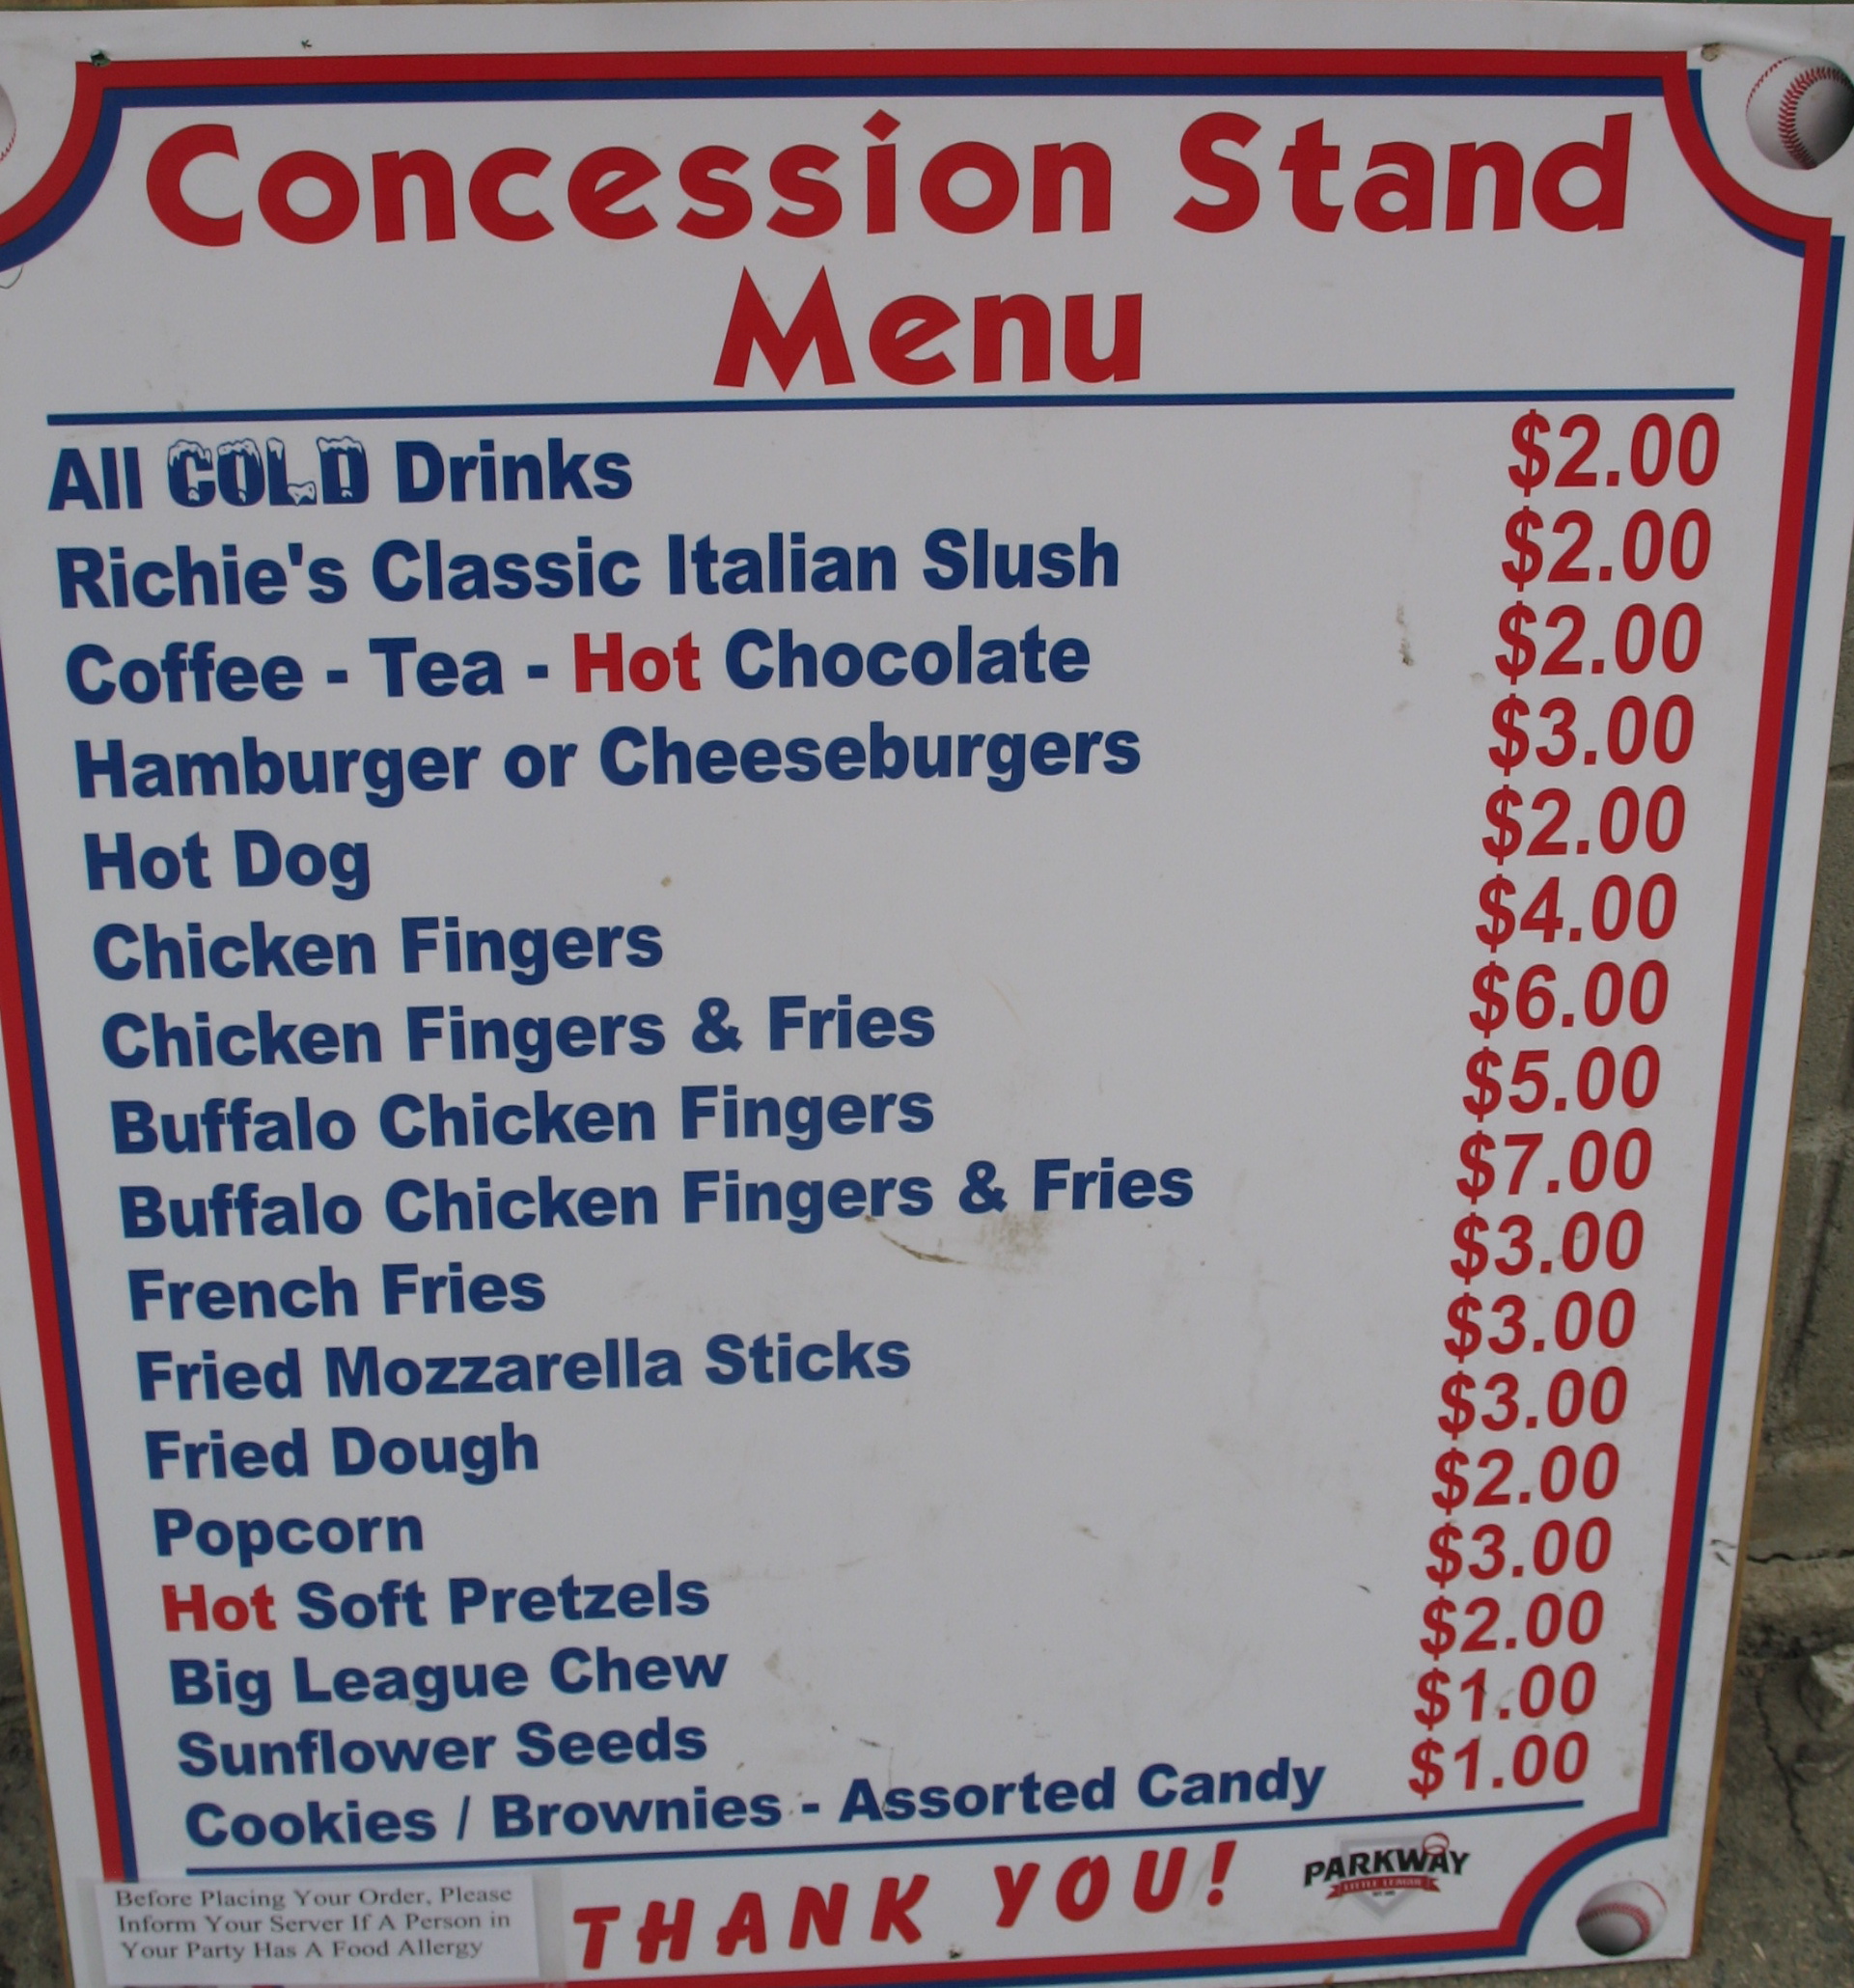 Little League Baseball foods - Blog - Lester Esser Within Concession Stand Menu Template